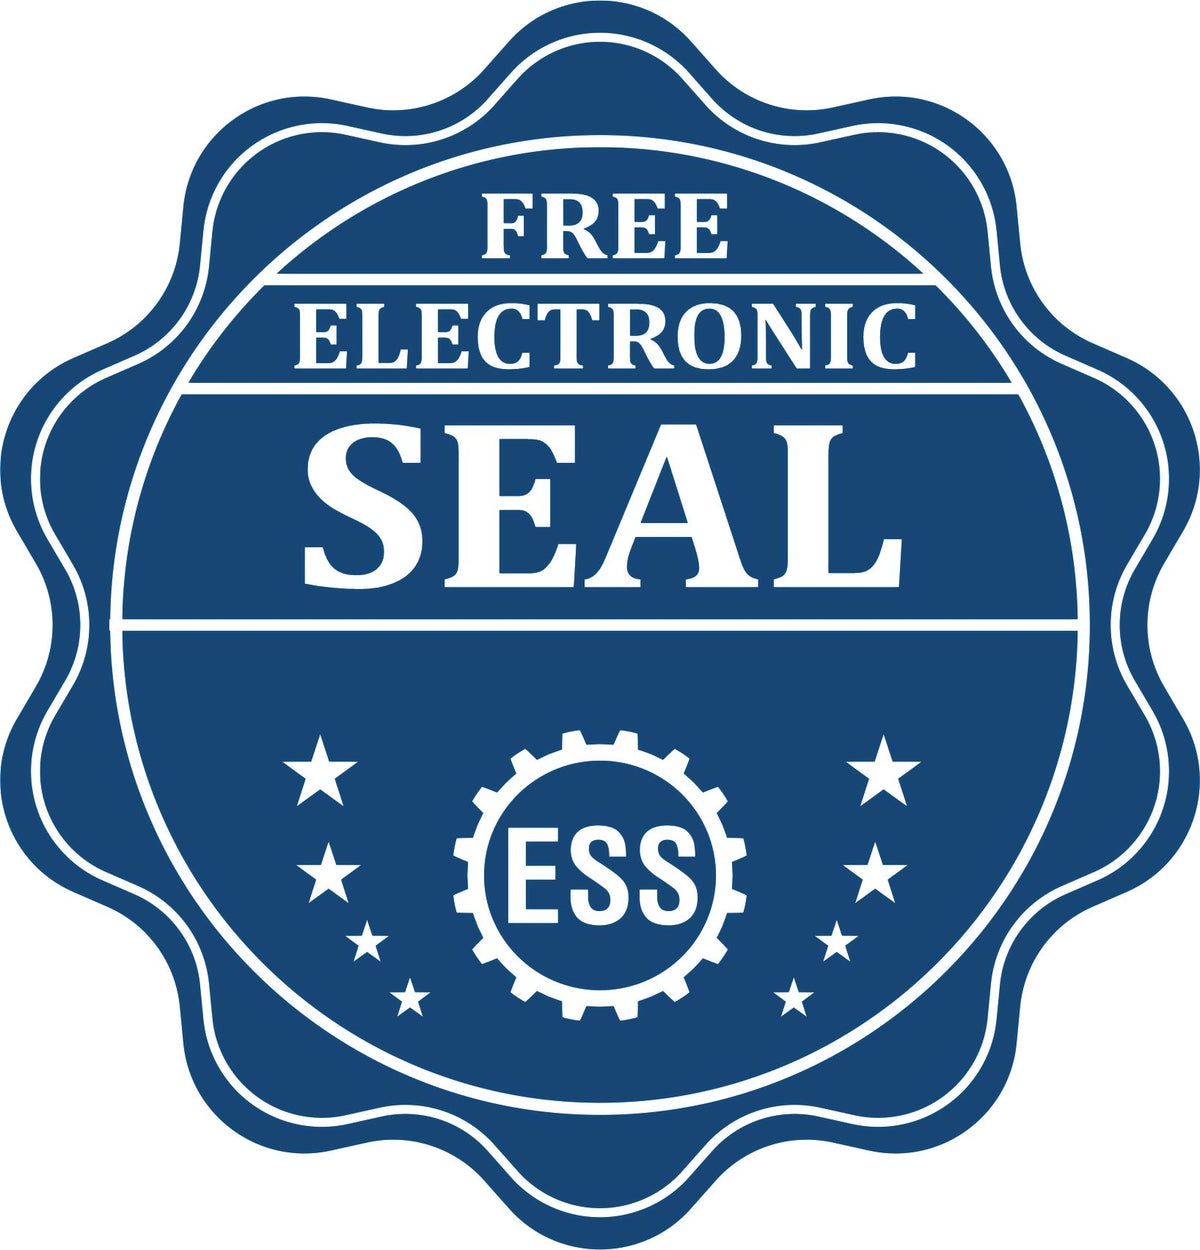 A badge showing a free electronic seal for the Gift Arizona Landscape Architect Seal with stars and the ESS gear on the emblem.